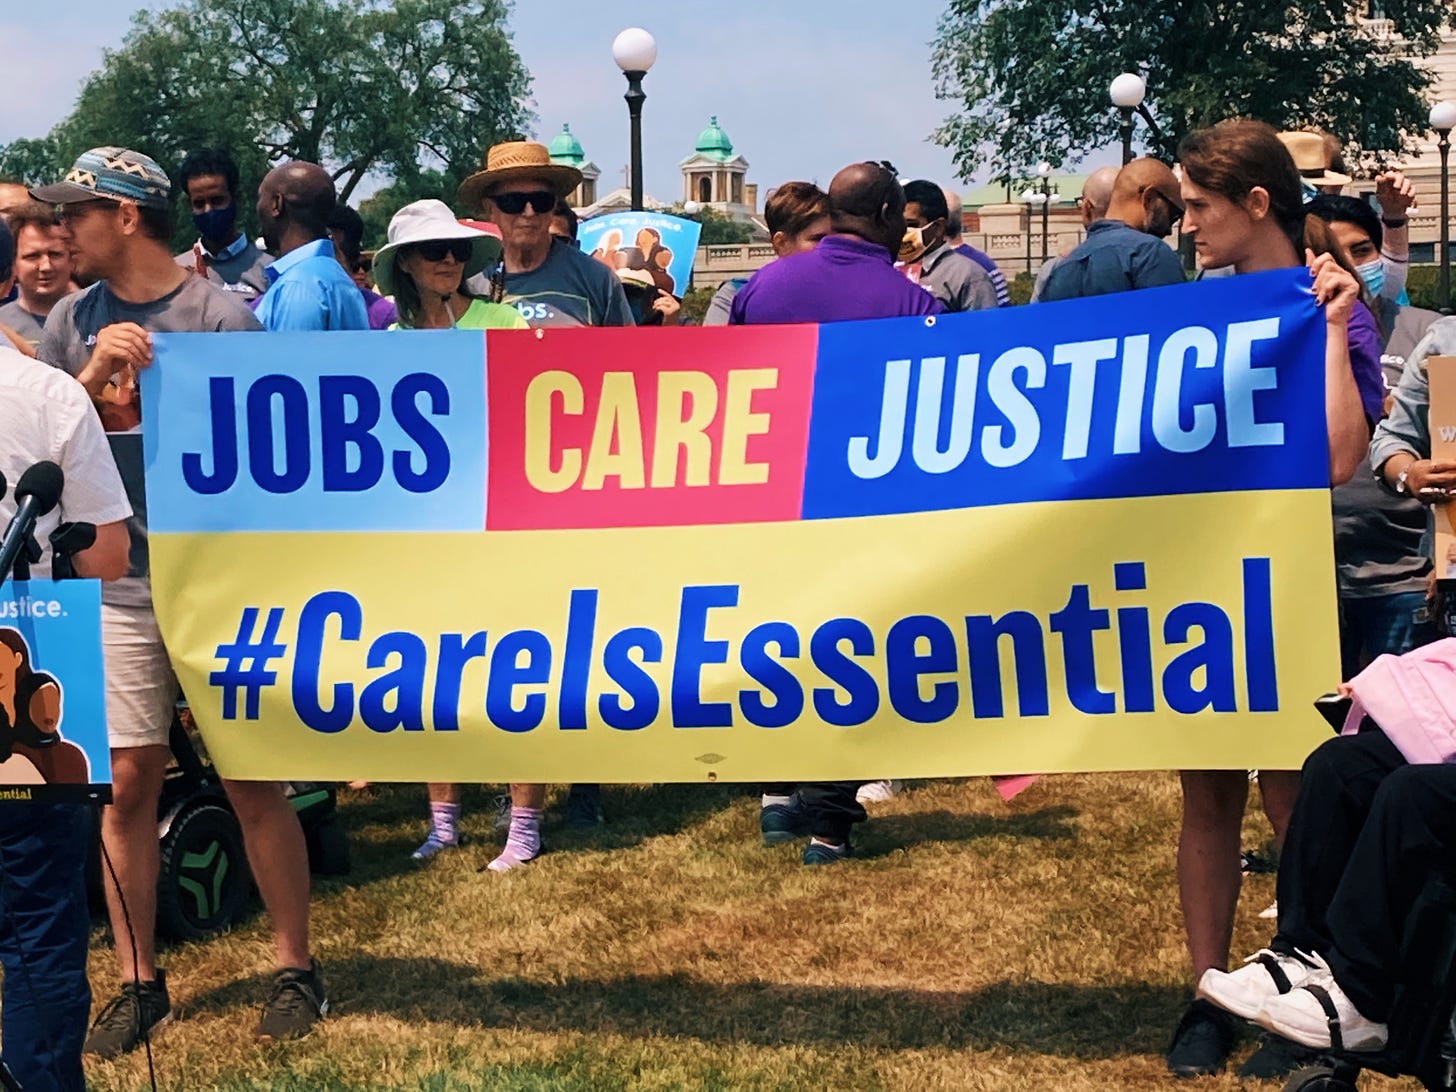 people hold up banner with text reading "jobs care justice #careisessential" in blue and yellow text with yellow, red, and blue background